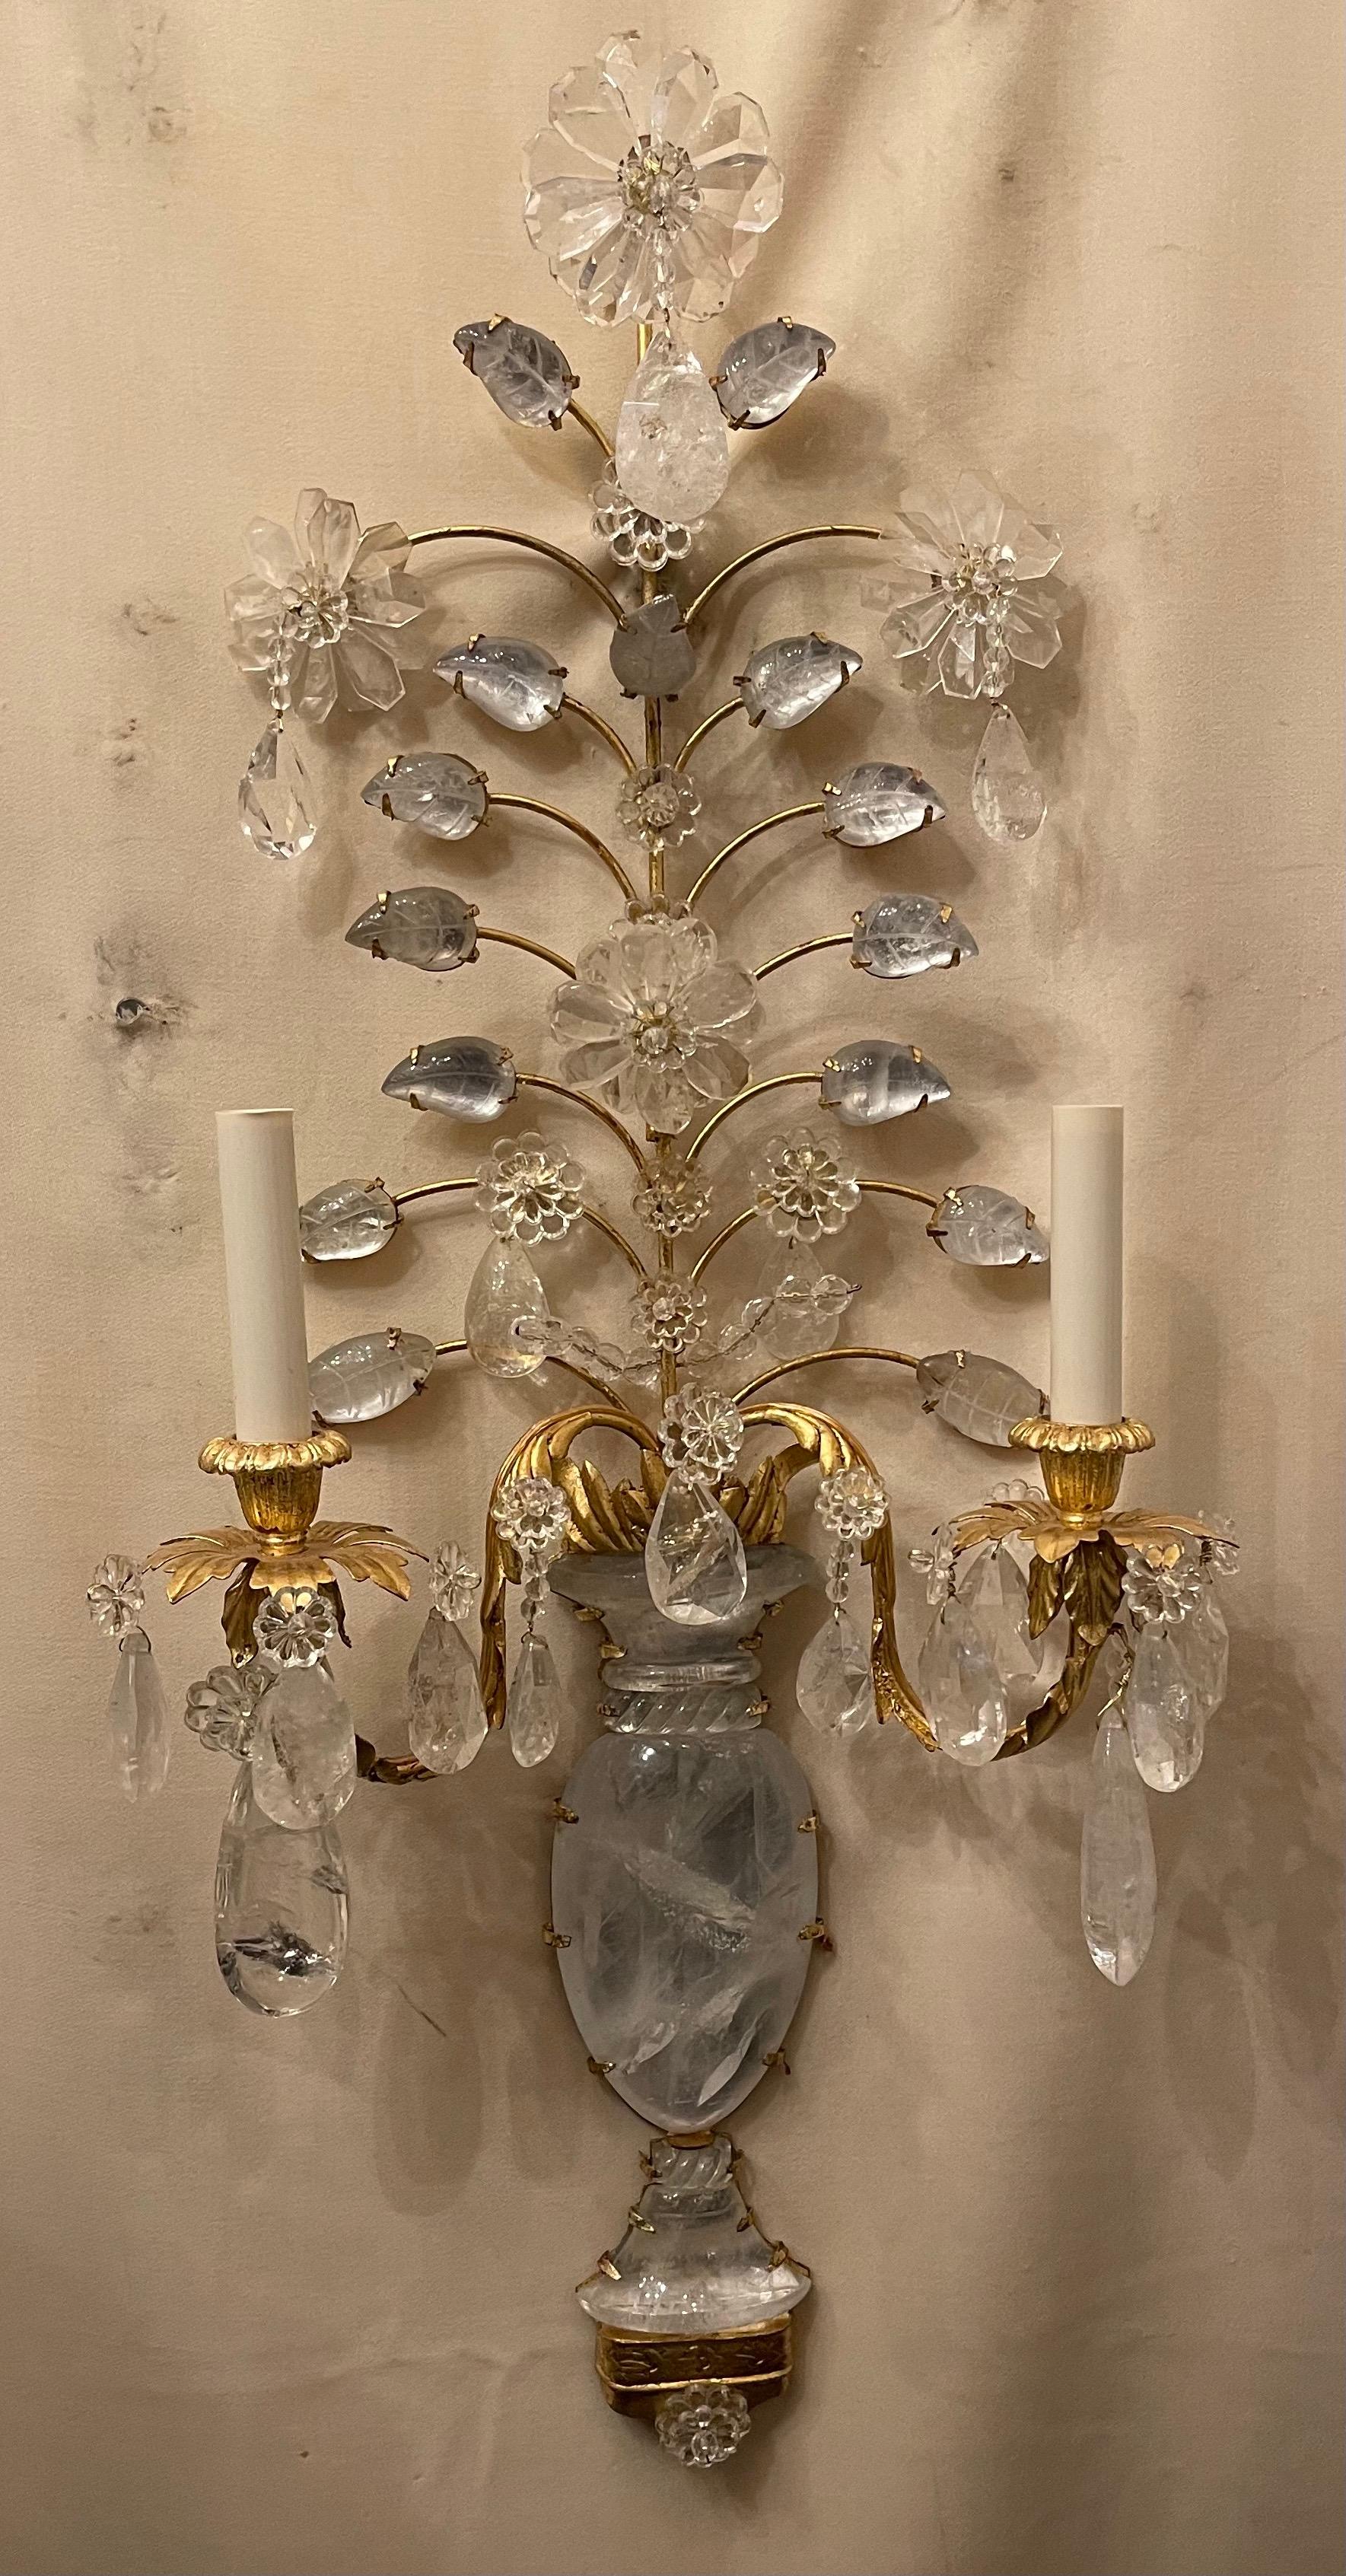 A wonderful pair of two candelabra light french gold gilt and rock crystal flower / urn form Maison Baguès style sconces, they are completely rewired.

Two pairs available.